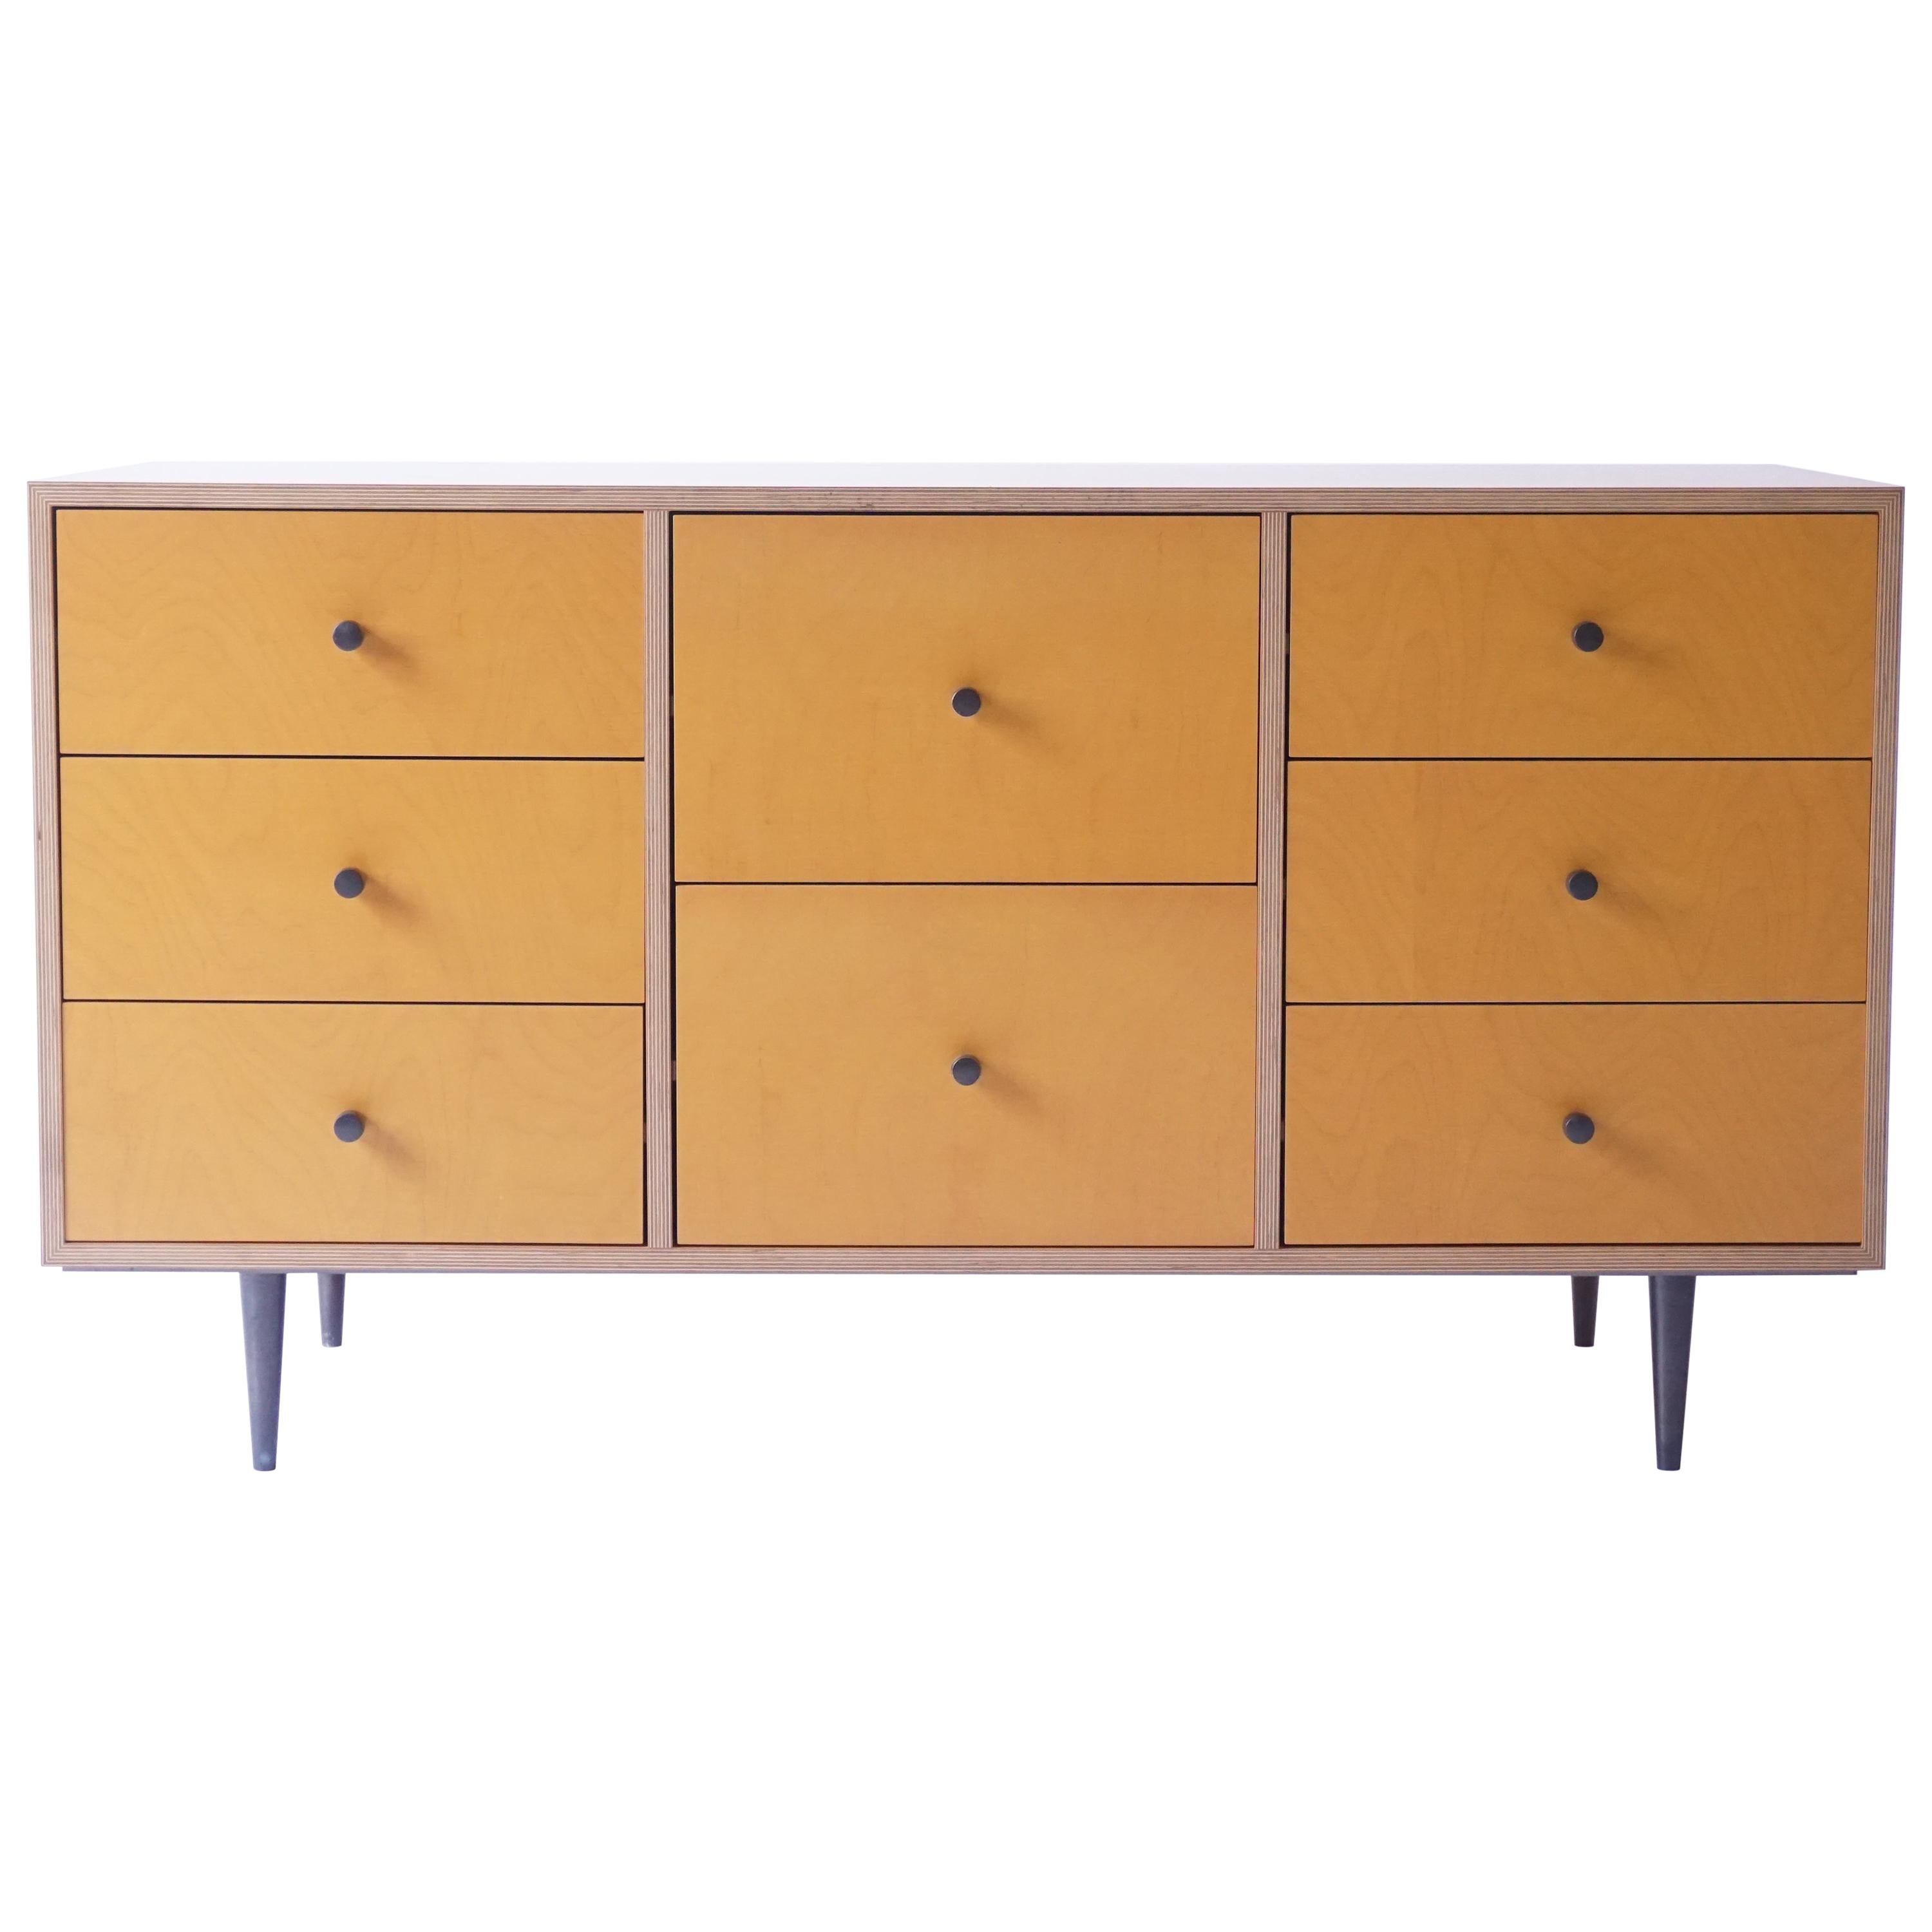 Yellow Finn-Ply Cabinet with Bronze Pulls and Turned Bronze Legs